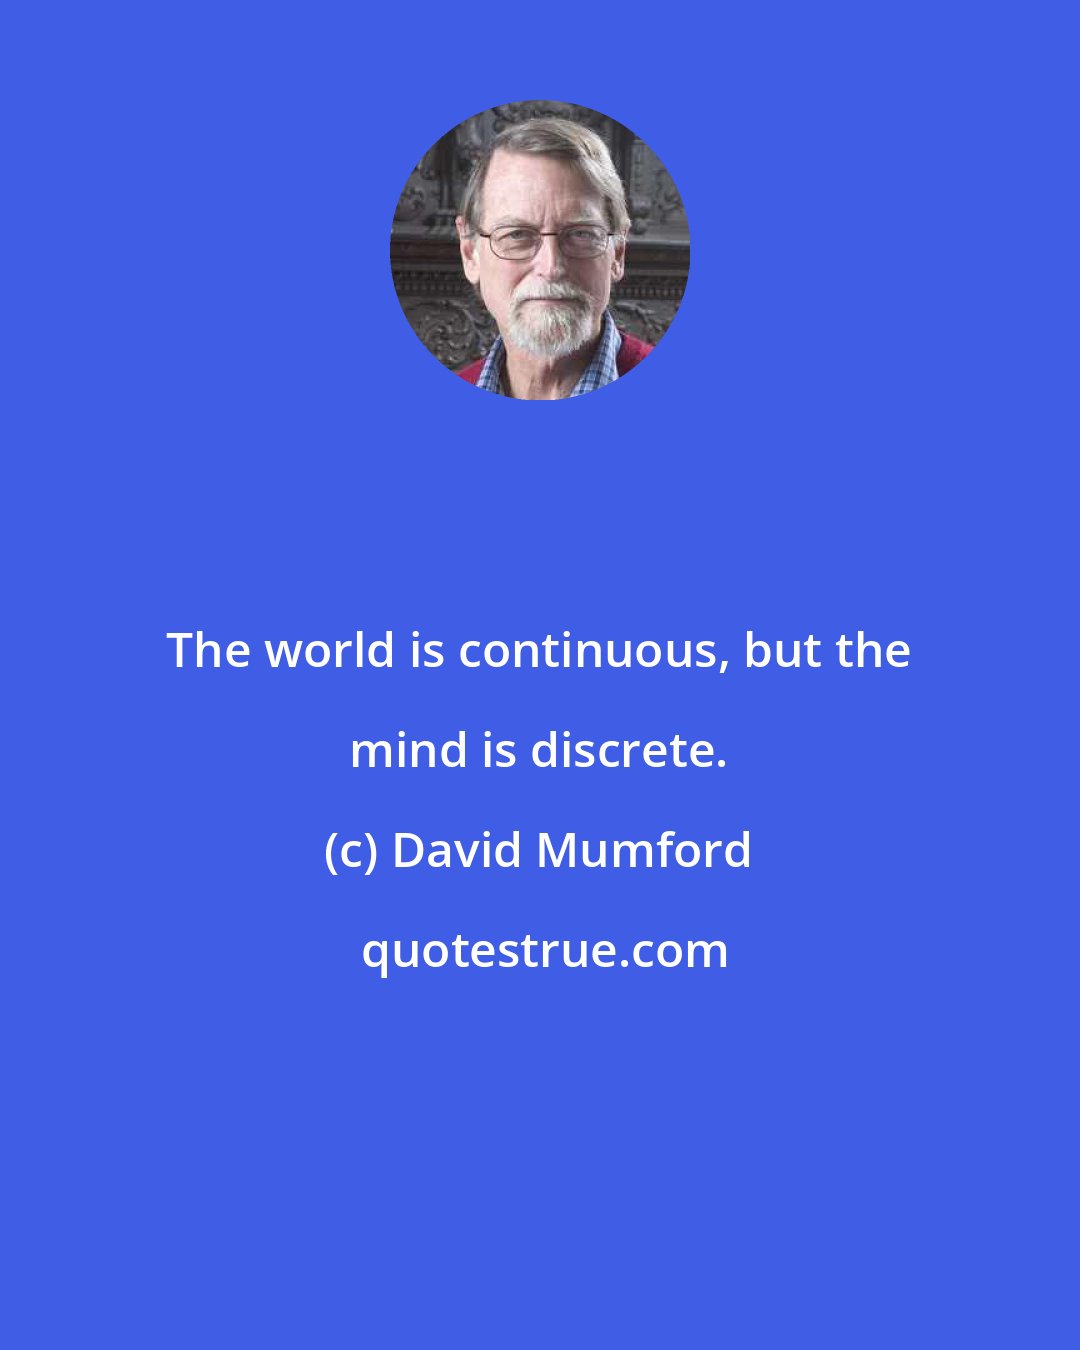 David Mumford: The world is continuous, but the mind is discrete.